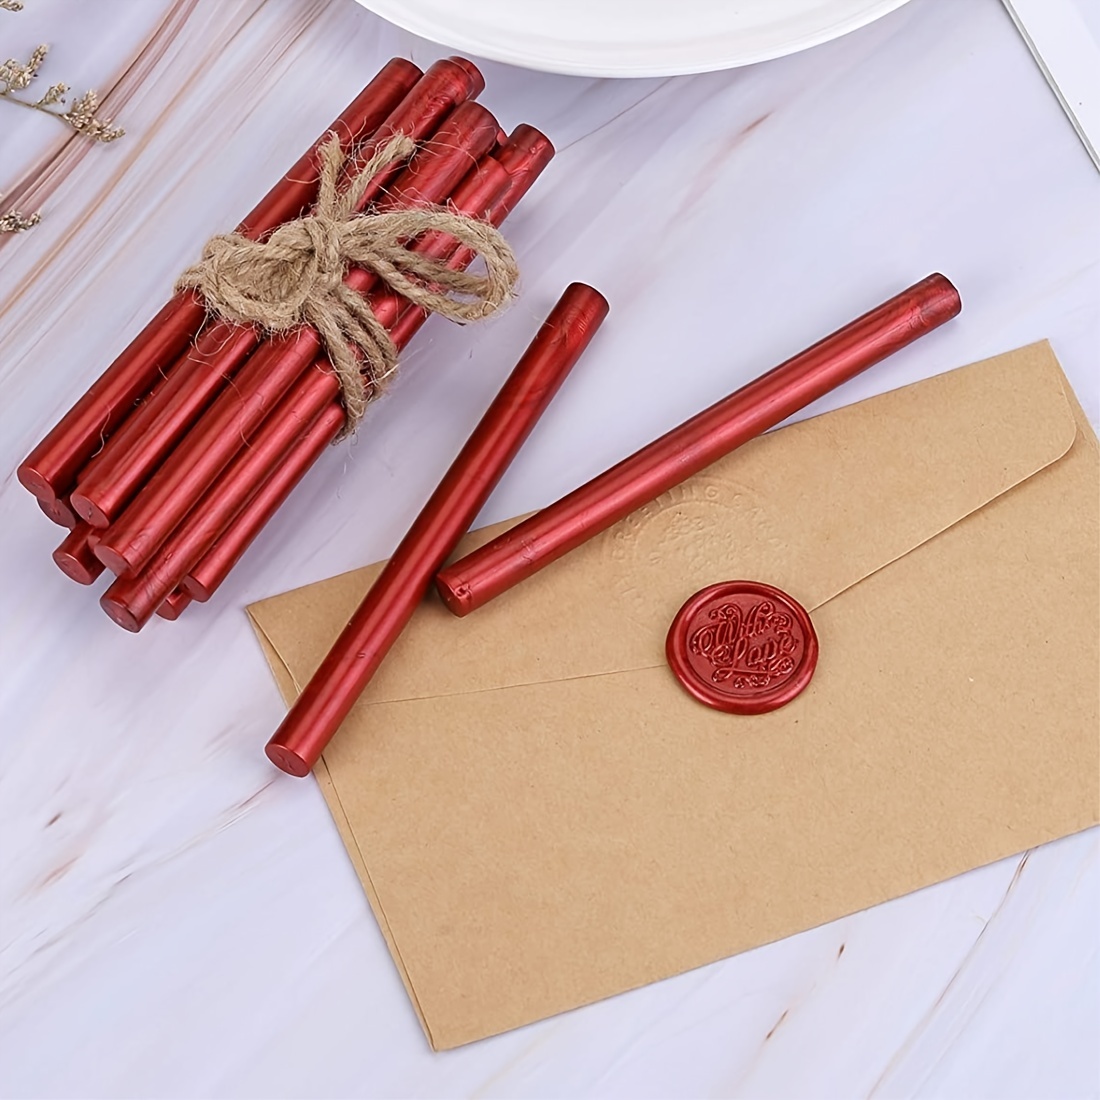  Wasole 12 Pieces Brown Red Glue Gun Sealing Wax Sticks for Wax  Seal Stamp and Letter, Great for Wedding Invitations, Card, Envelope, Gift  Wrapping (Brown Red) : Arts, Crafts & Sewing